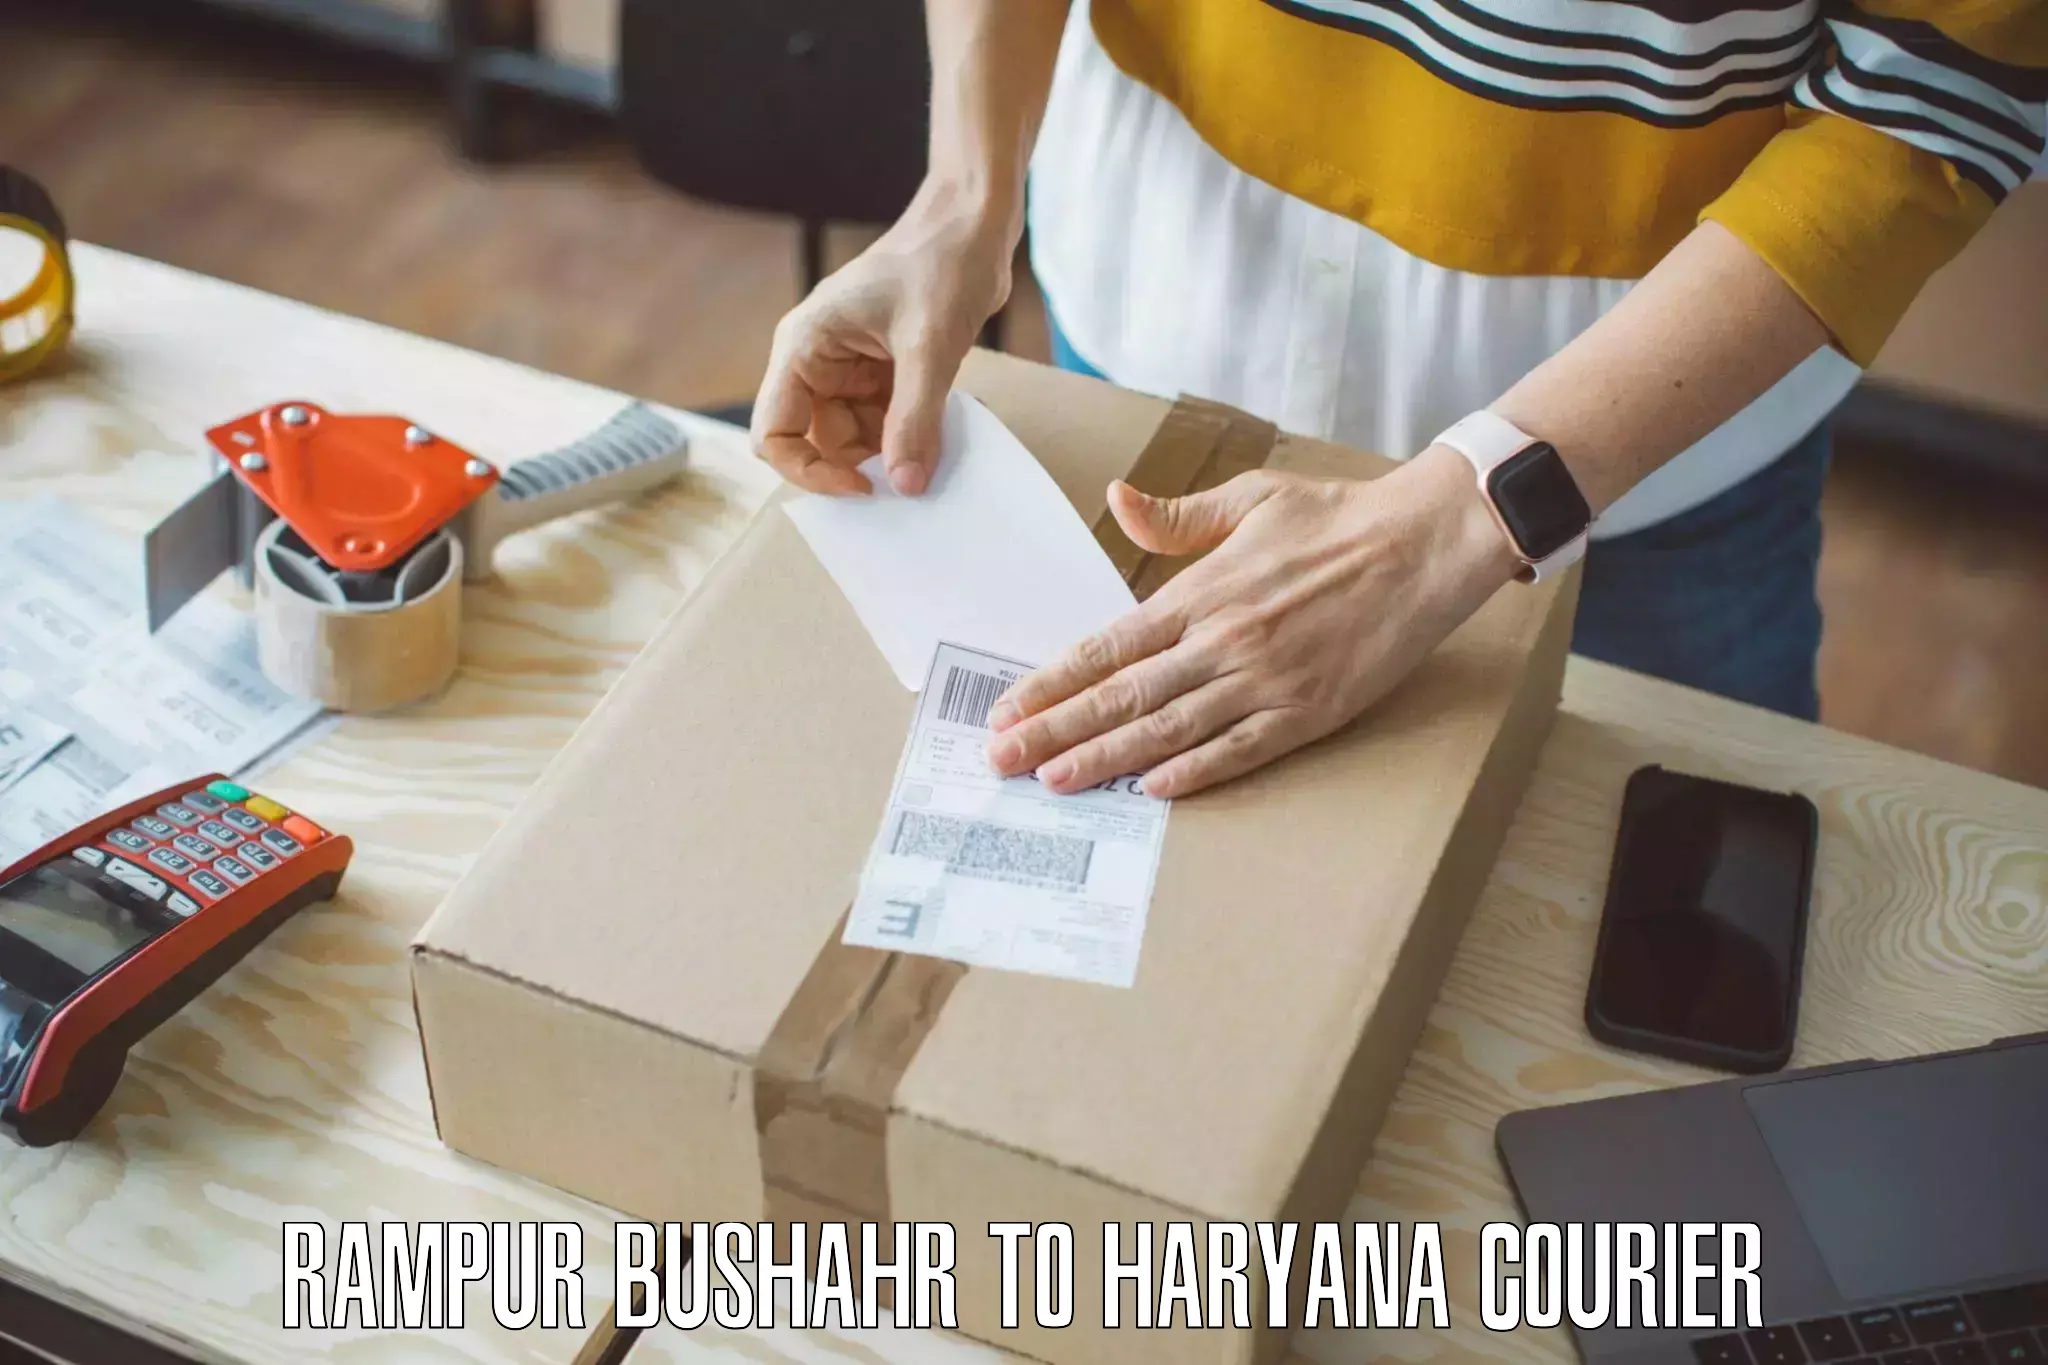 Professional movers and packers Rampur Bushahr to Bhuna